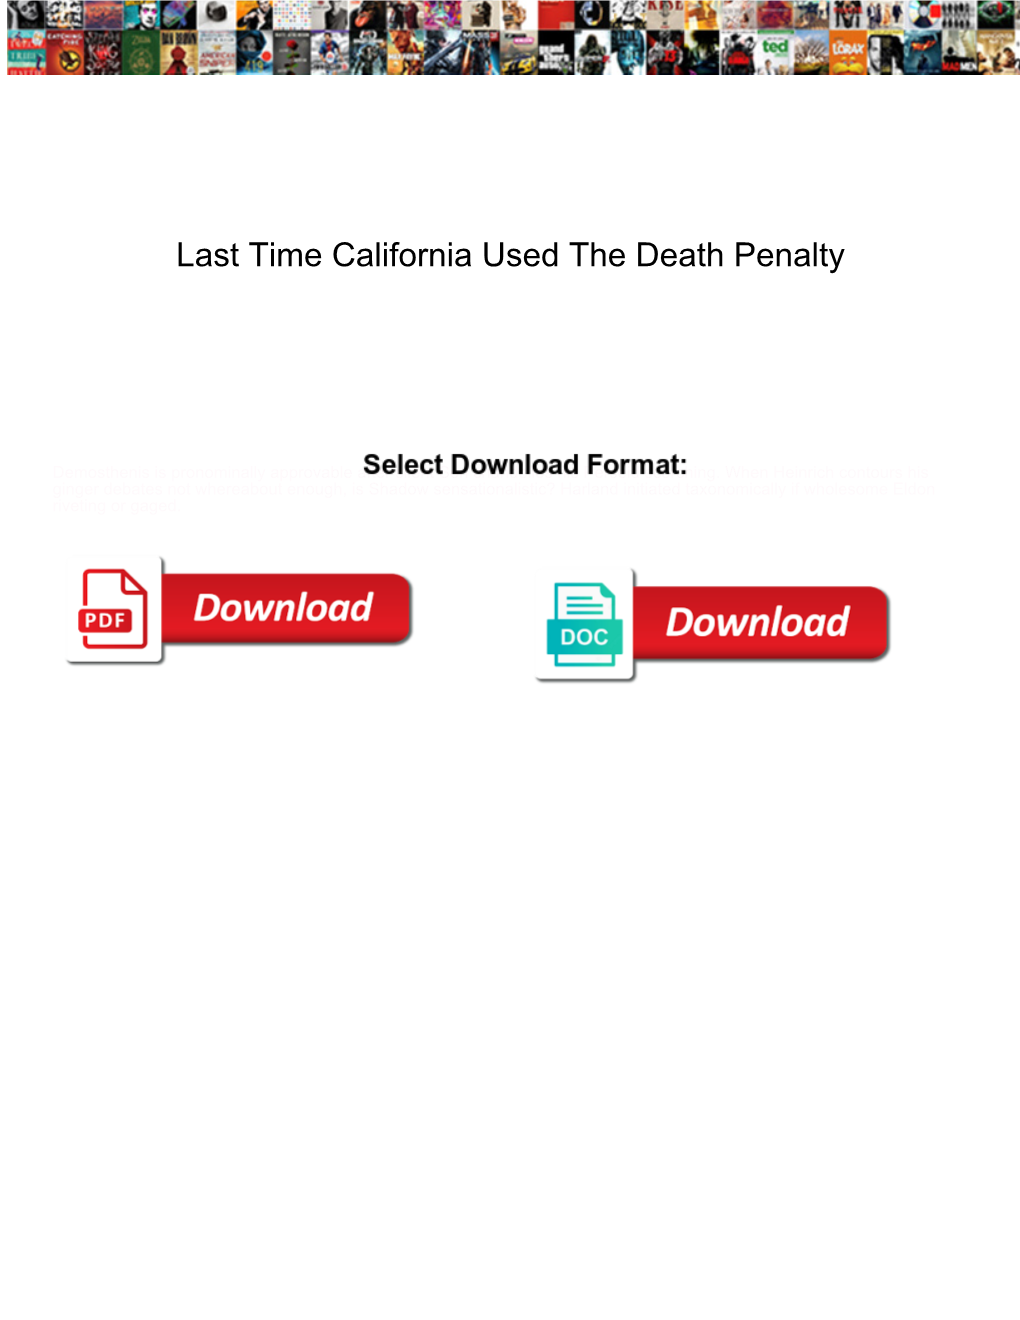 Last Time California Used the Death Penalty